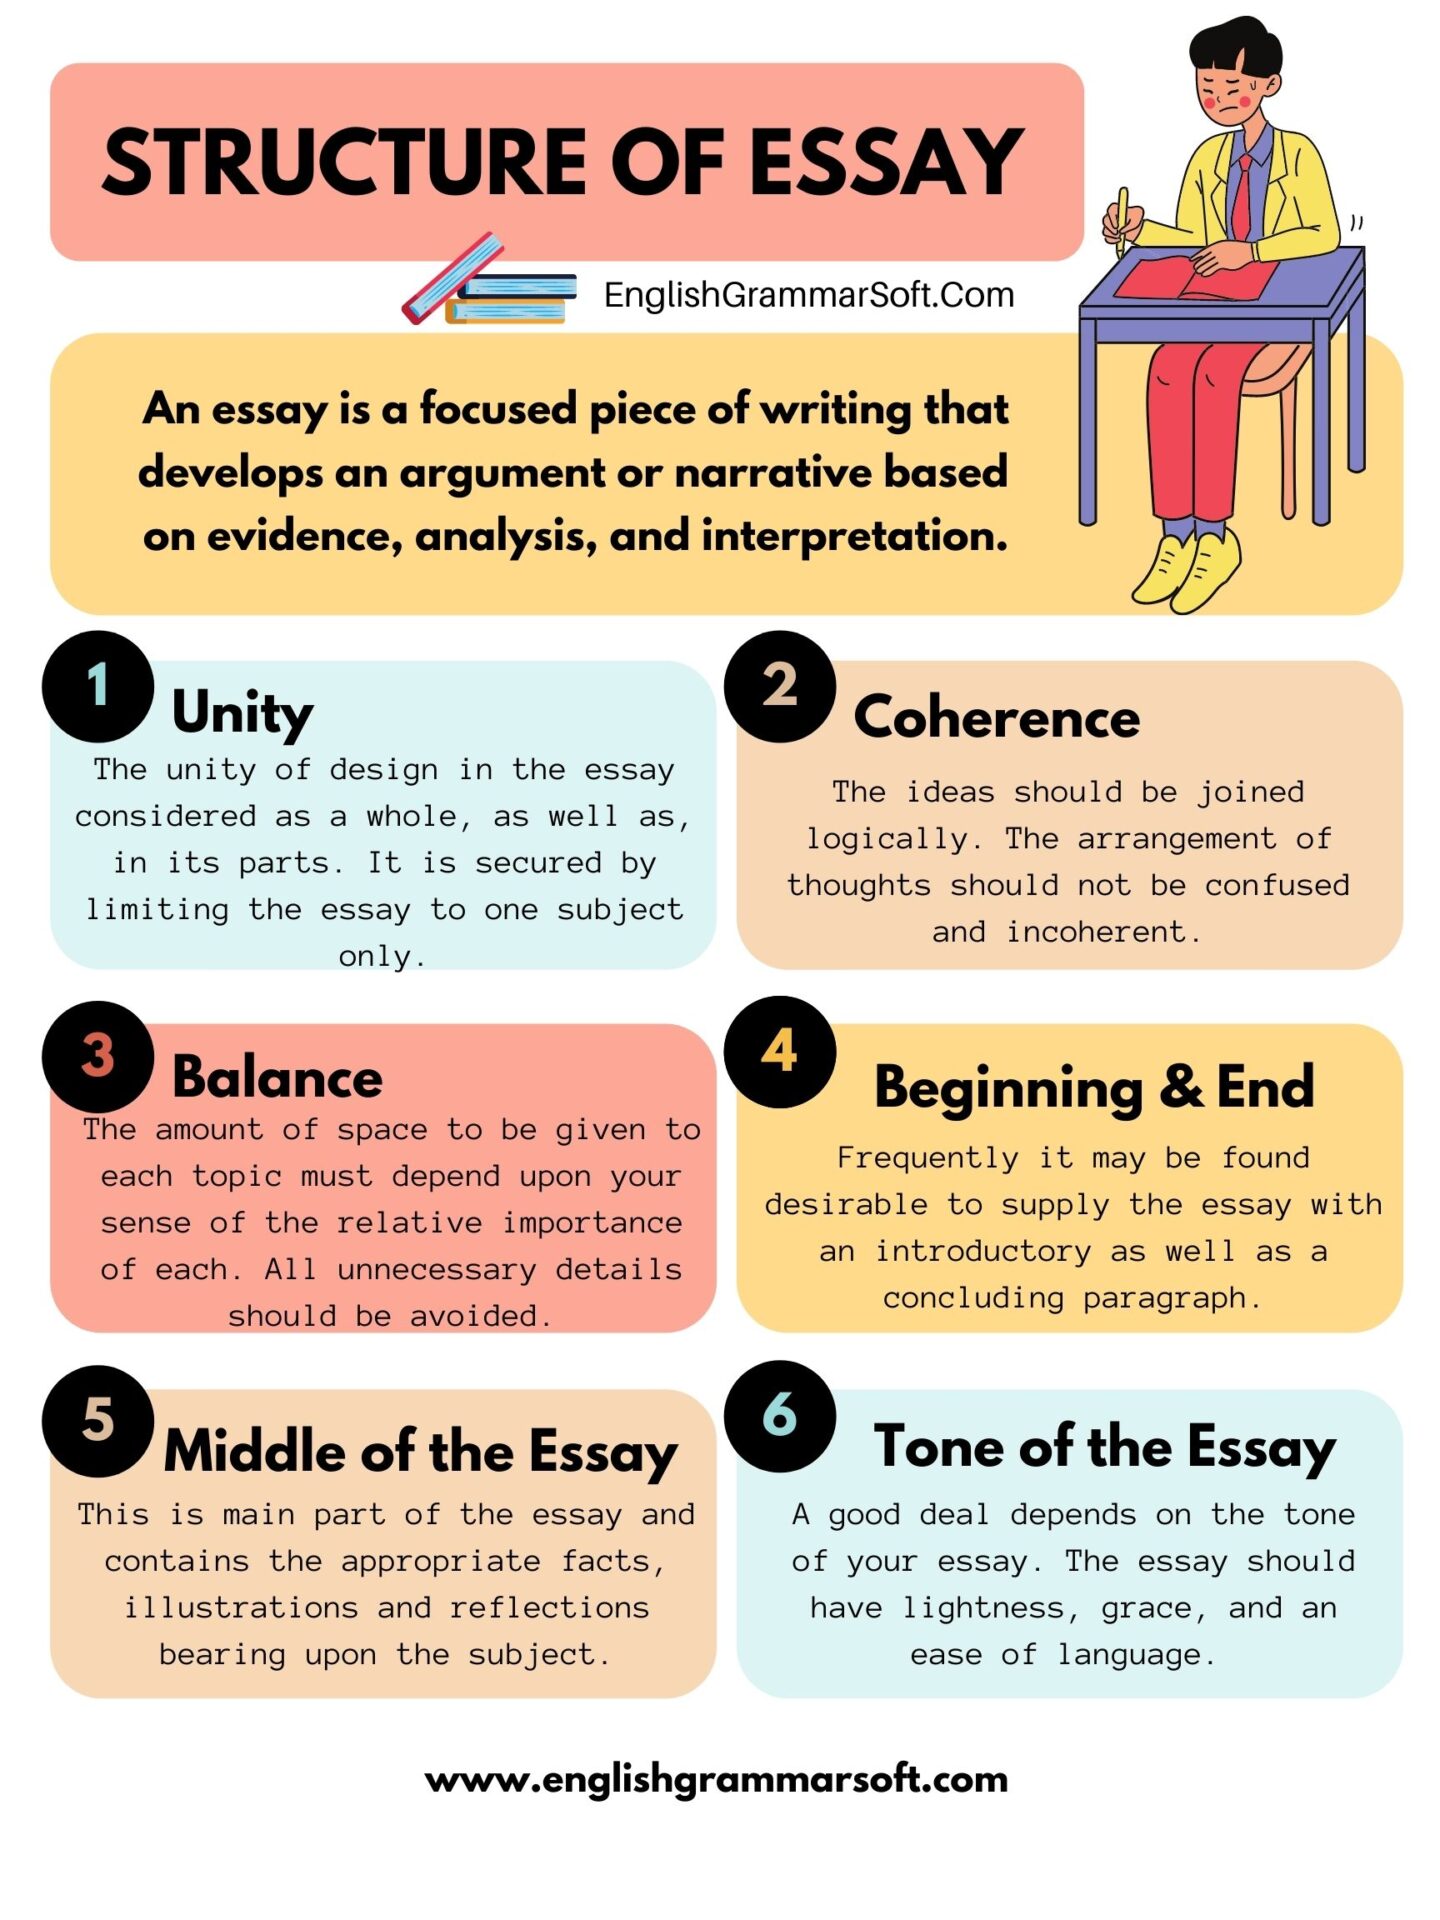 Structure of Essay